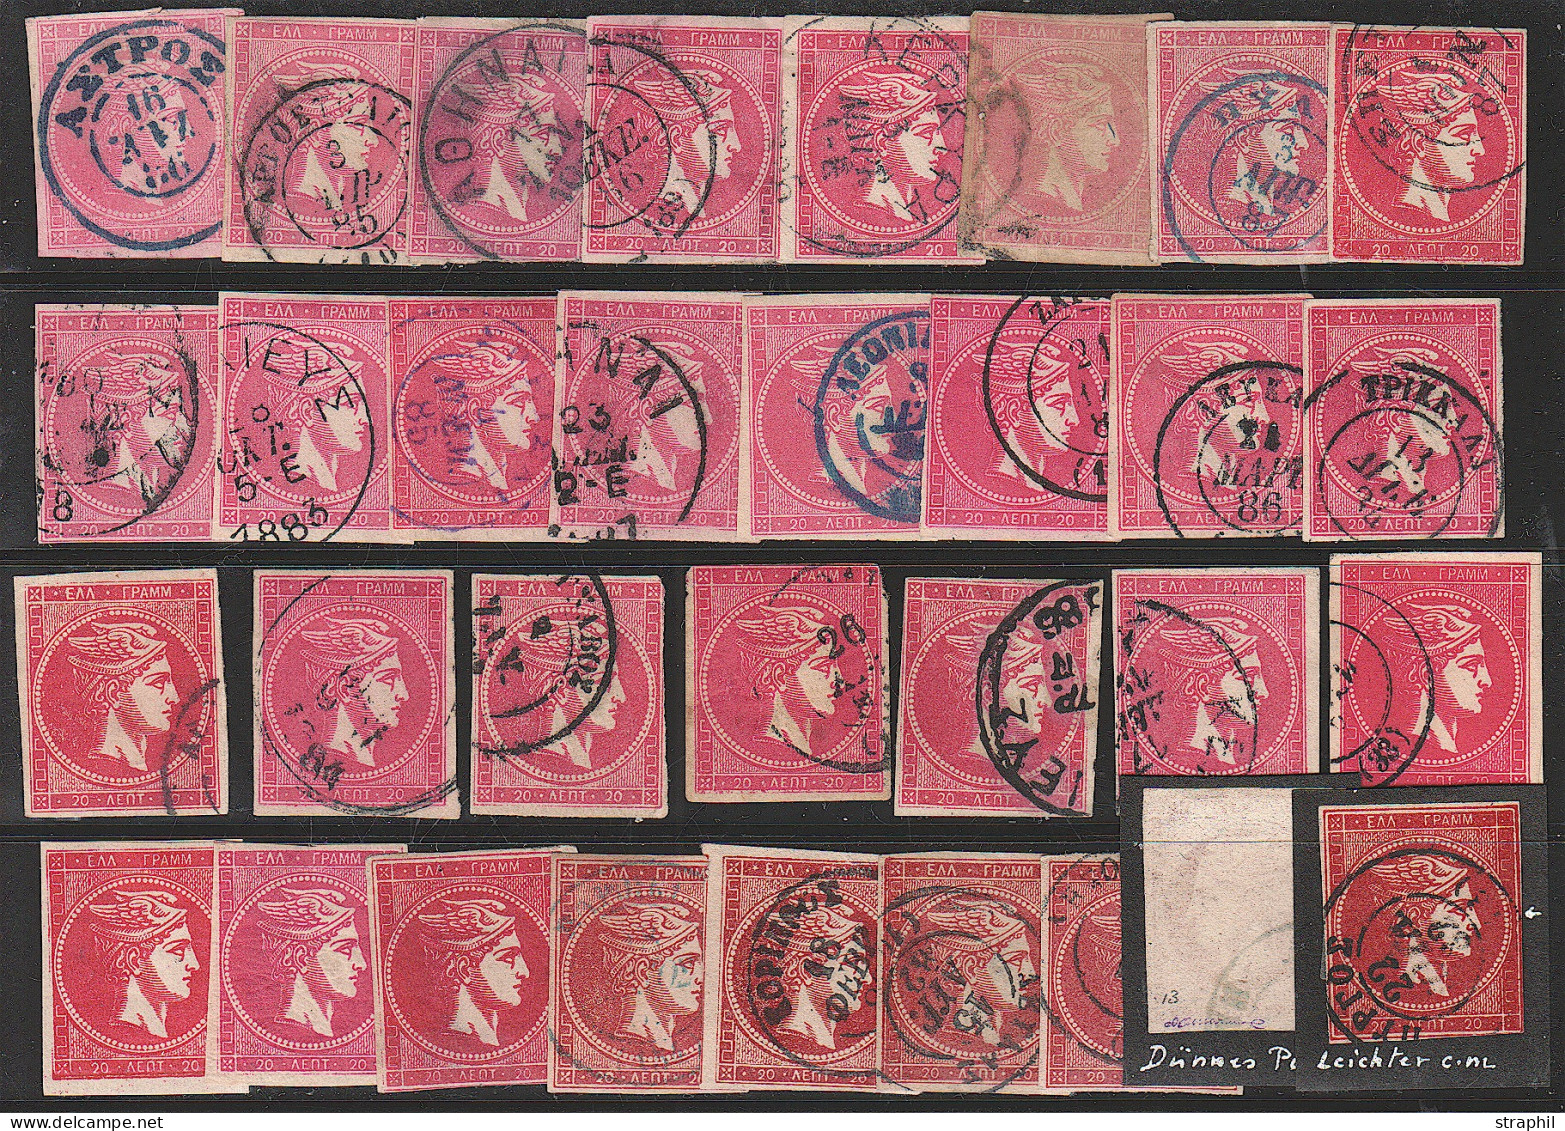 O GRECE - Used Stamps